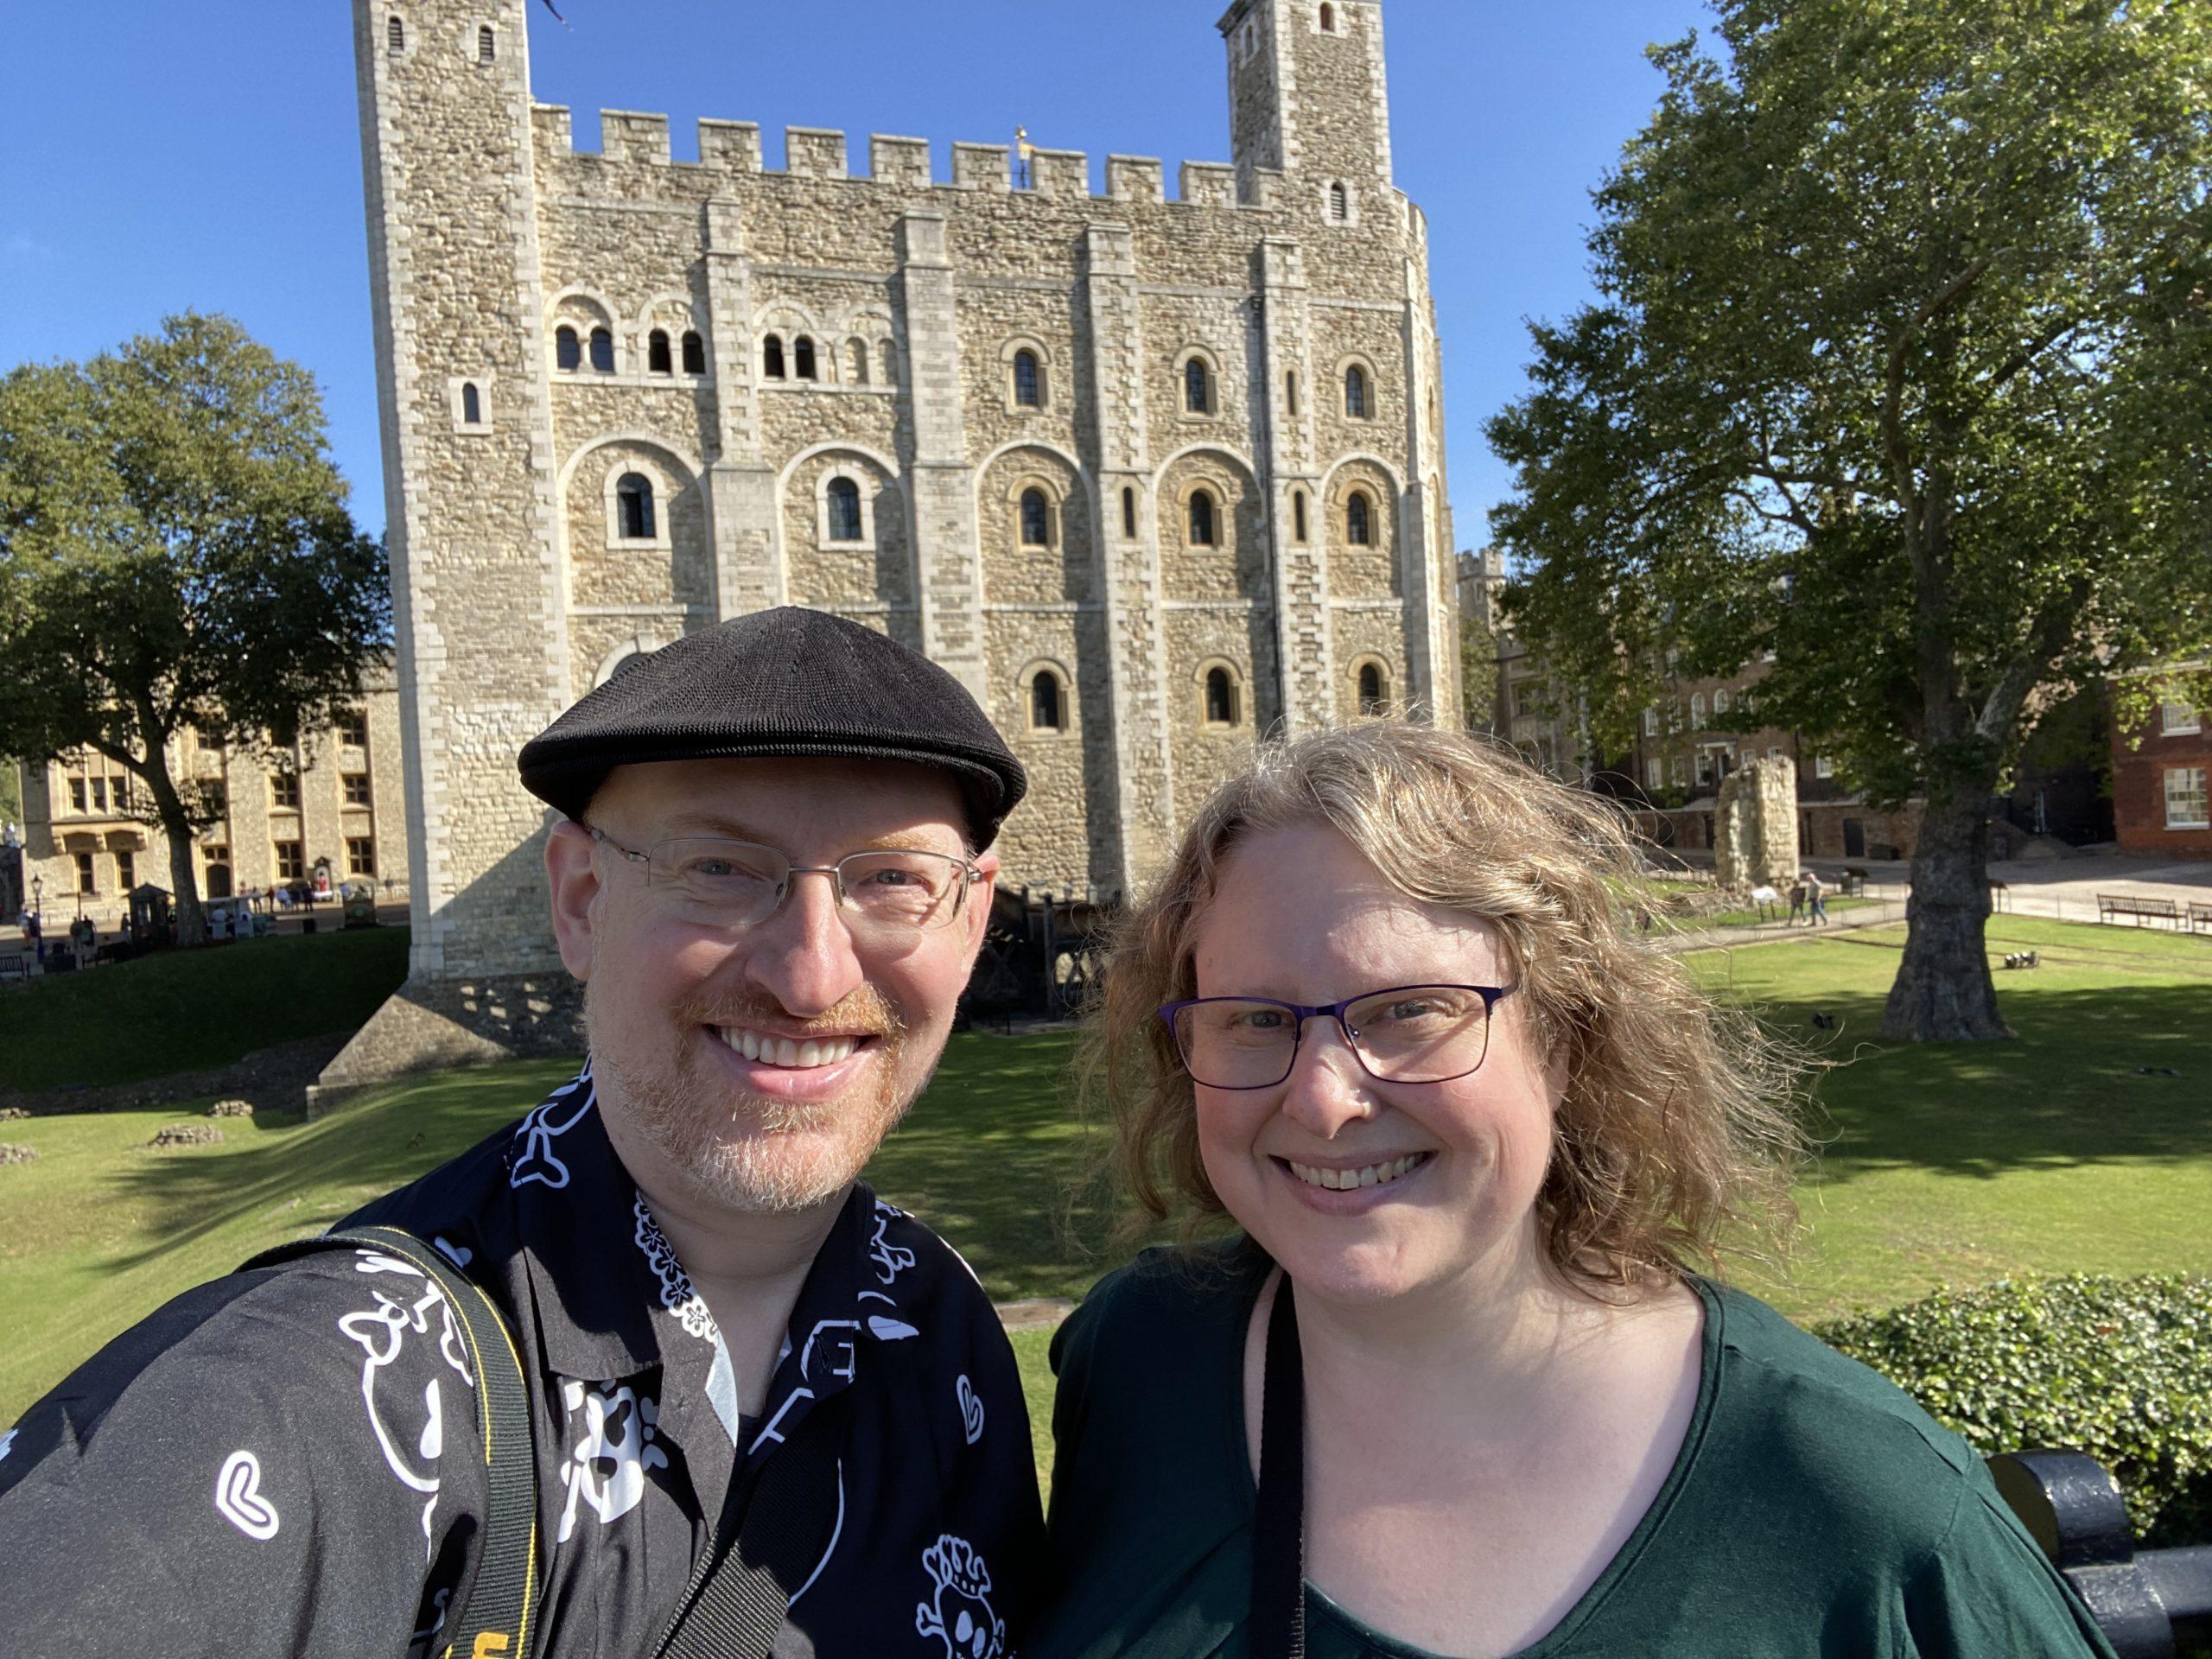 My wife and I at the Tower of London, with the White Tower visible behind us.